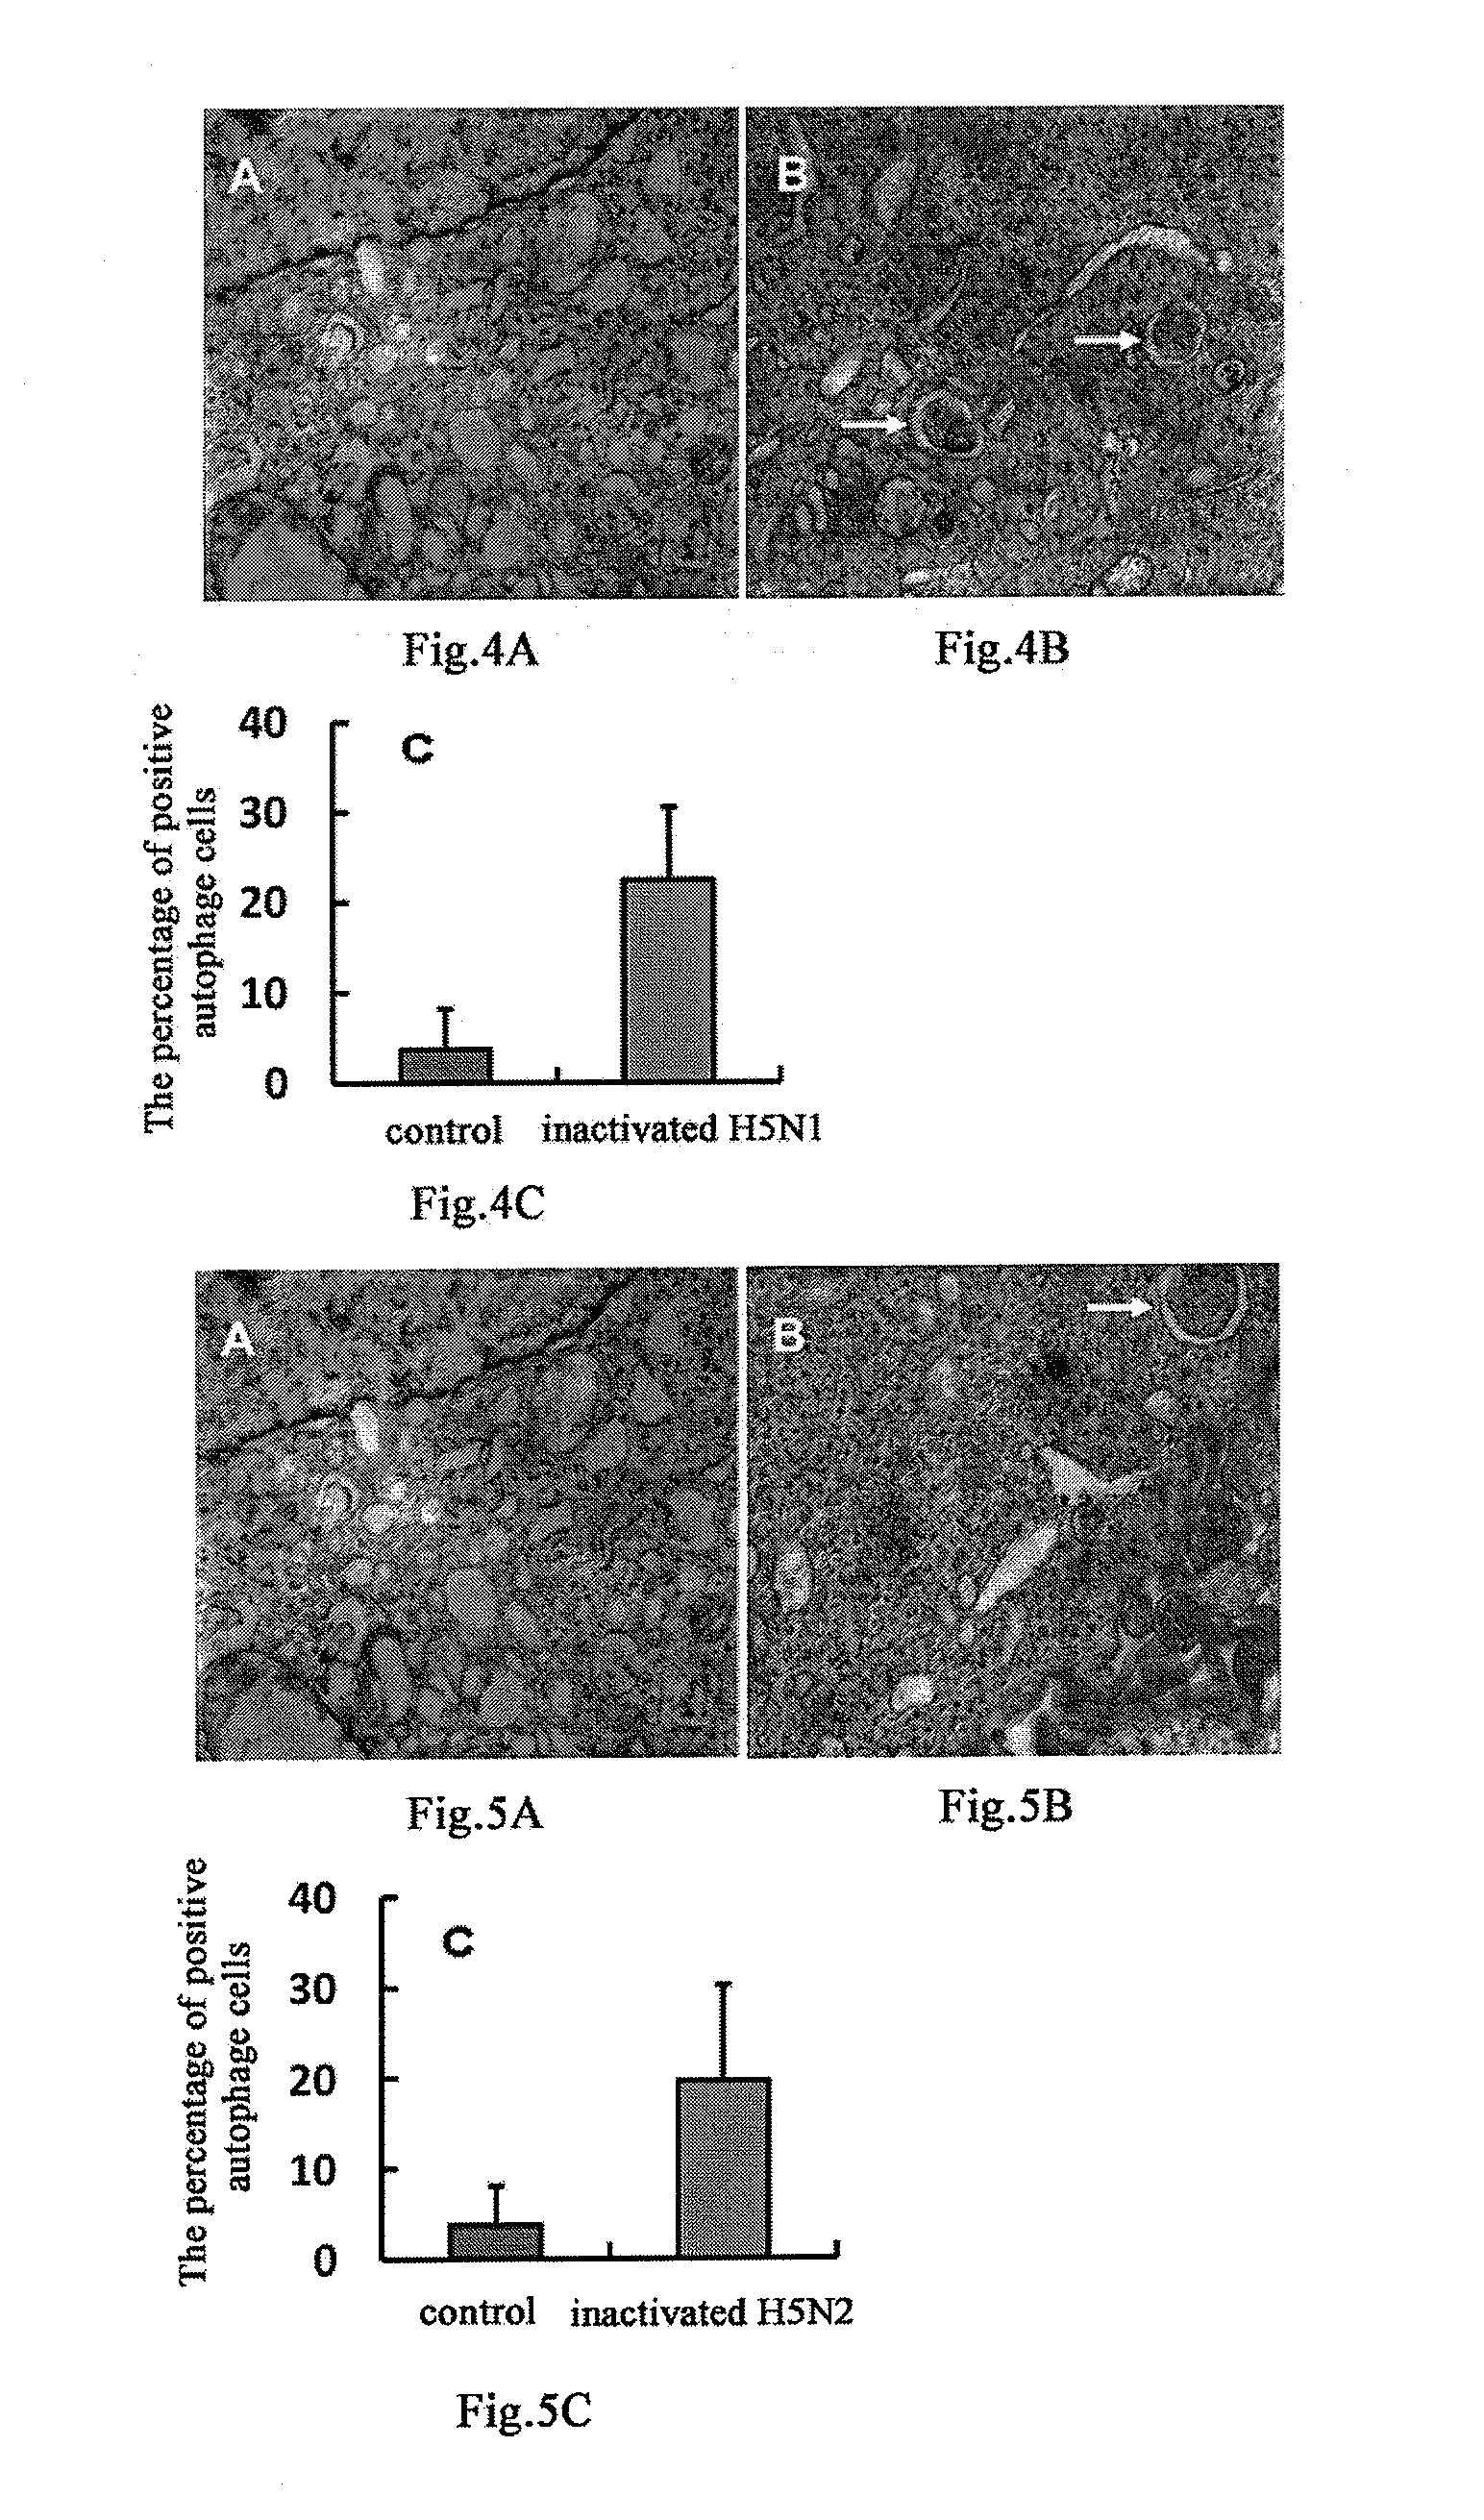 Use of cell autophagy (type ii cell apoptosis) inhibitors